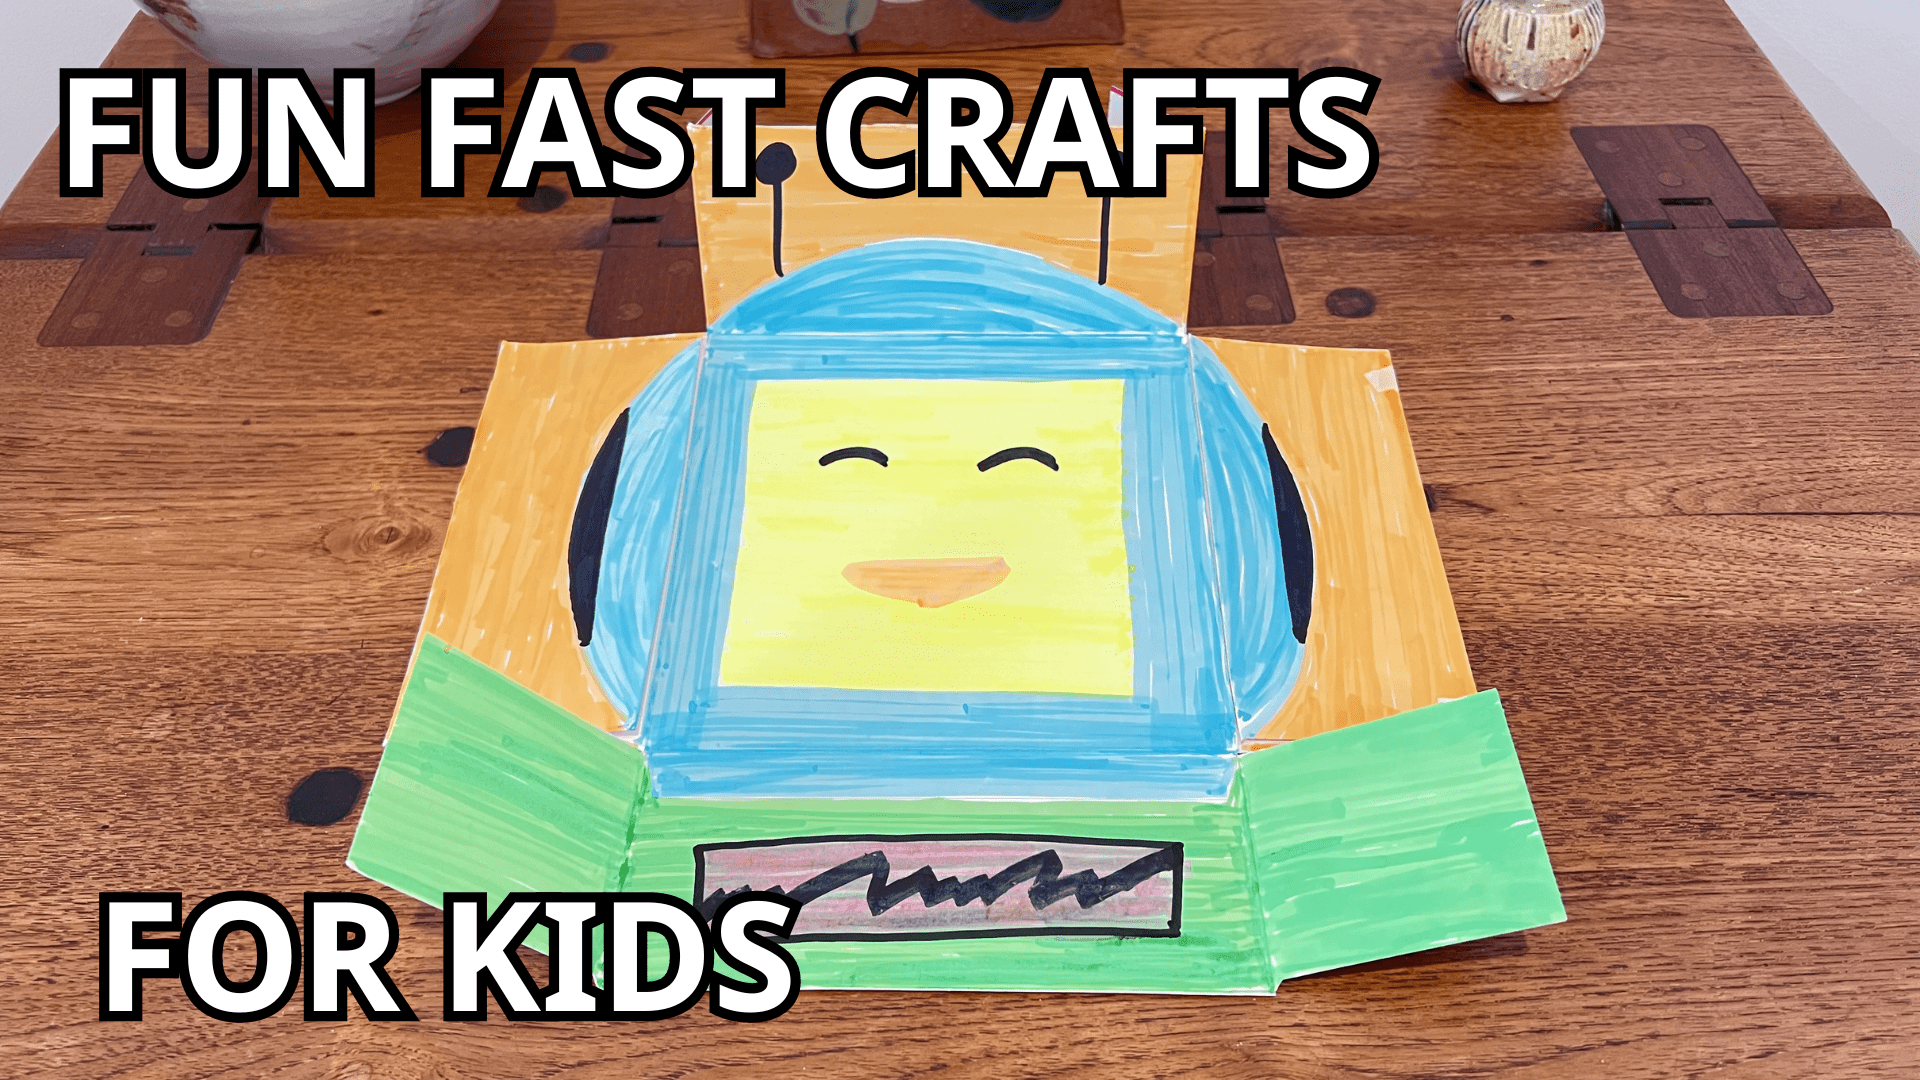 The text "Fun Fast Crafts for Kids" is shown. A photo has a drawn robot face with orange, green, and blue colors on a cardboard snack box.